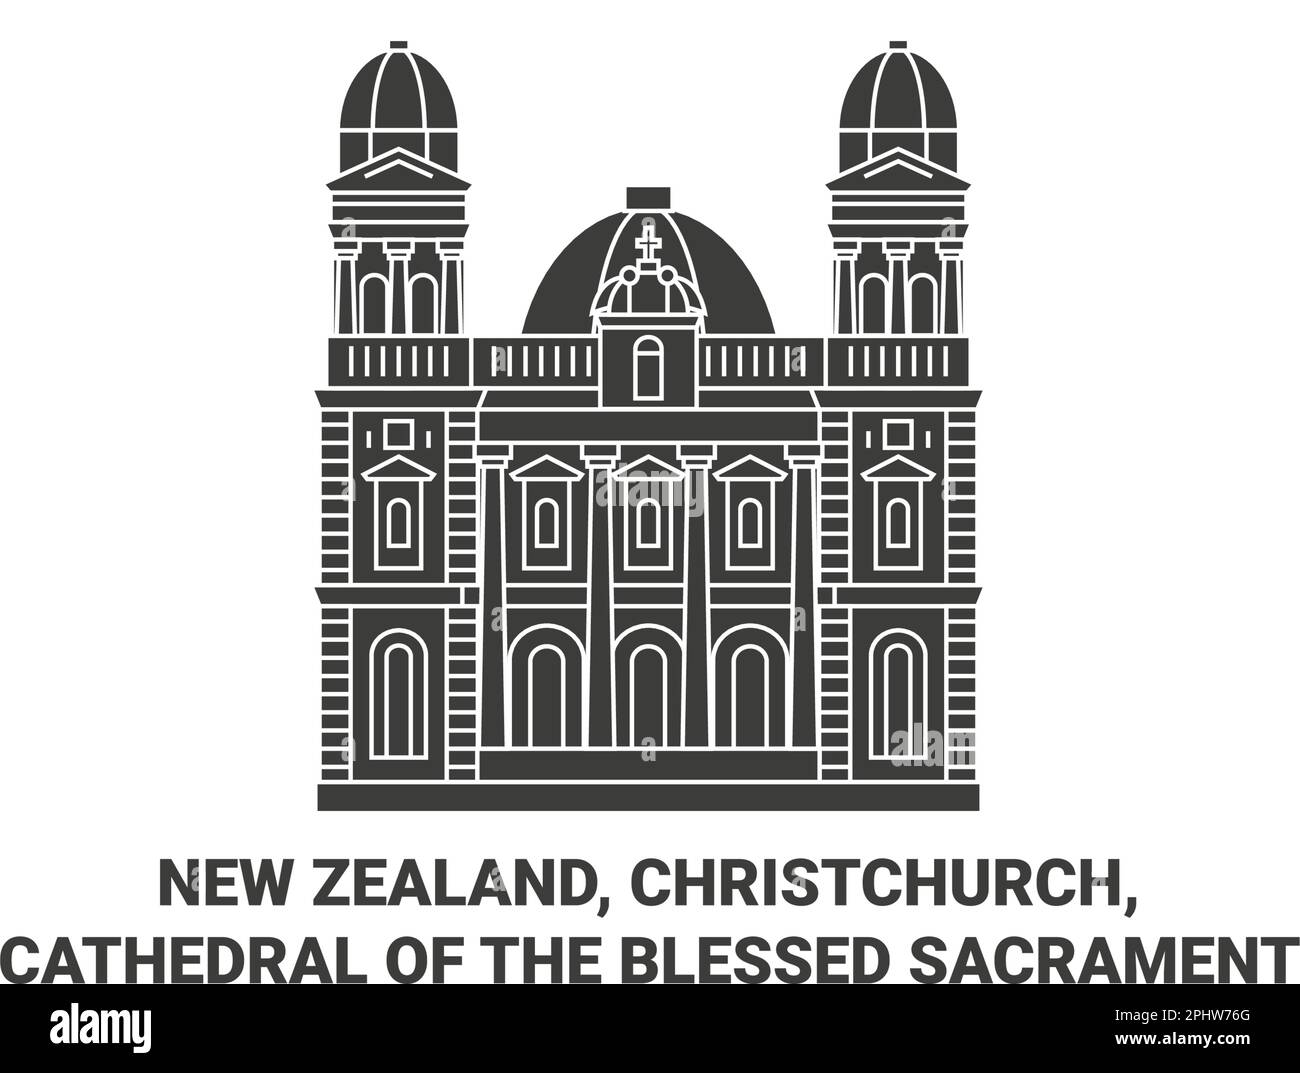 New Zealand, Christchurch, Cathedral Of The Blessed Sacrament travel landmark vector illustration Stock Vector